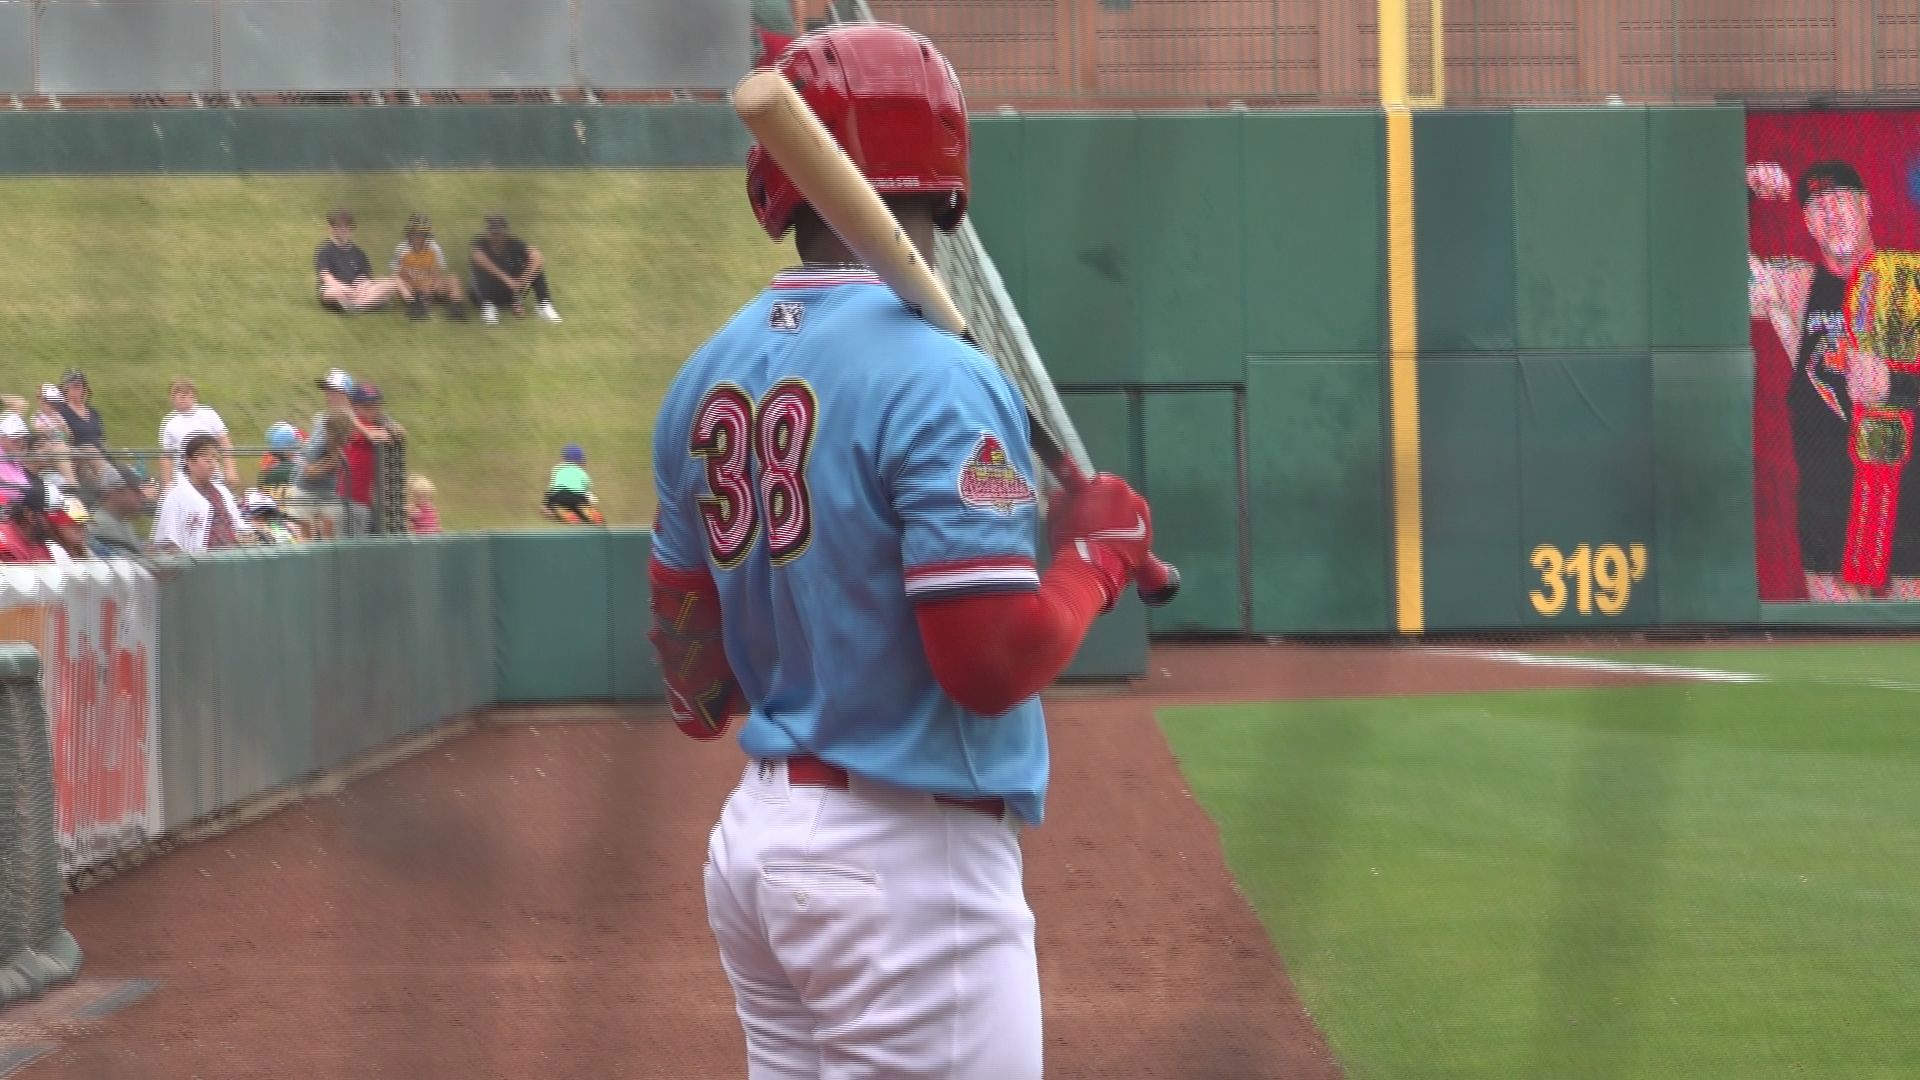 The Memphis Redbirds blow lead against the Jacksonville Jumbo Shrimp by allowing four runs in the eighth inning.